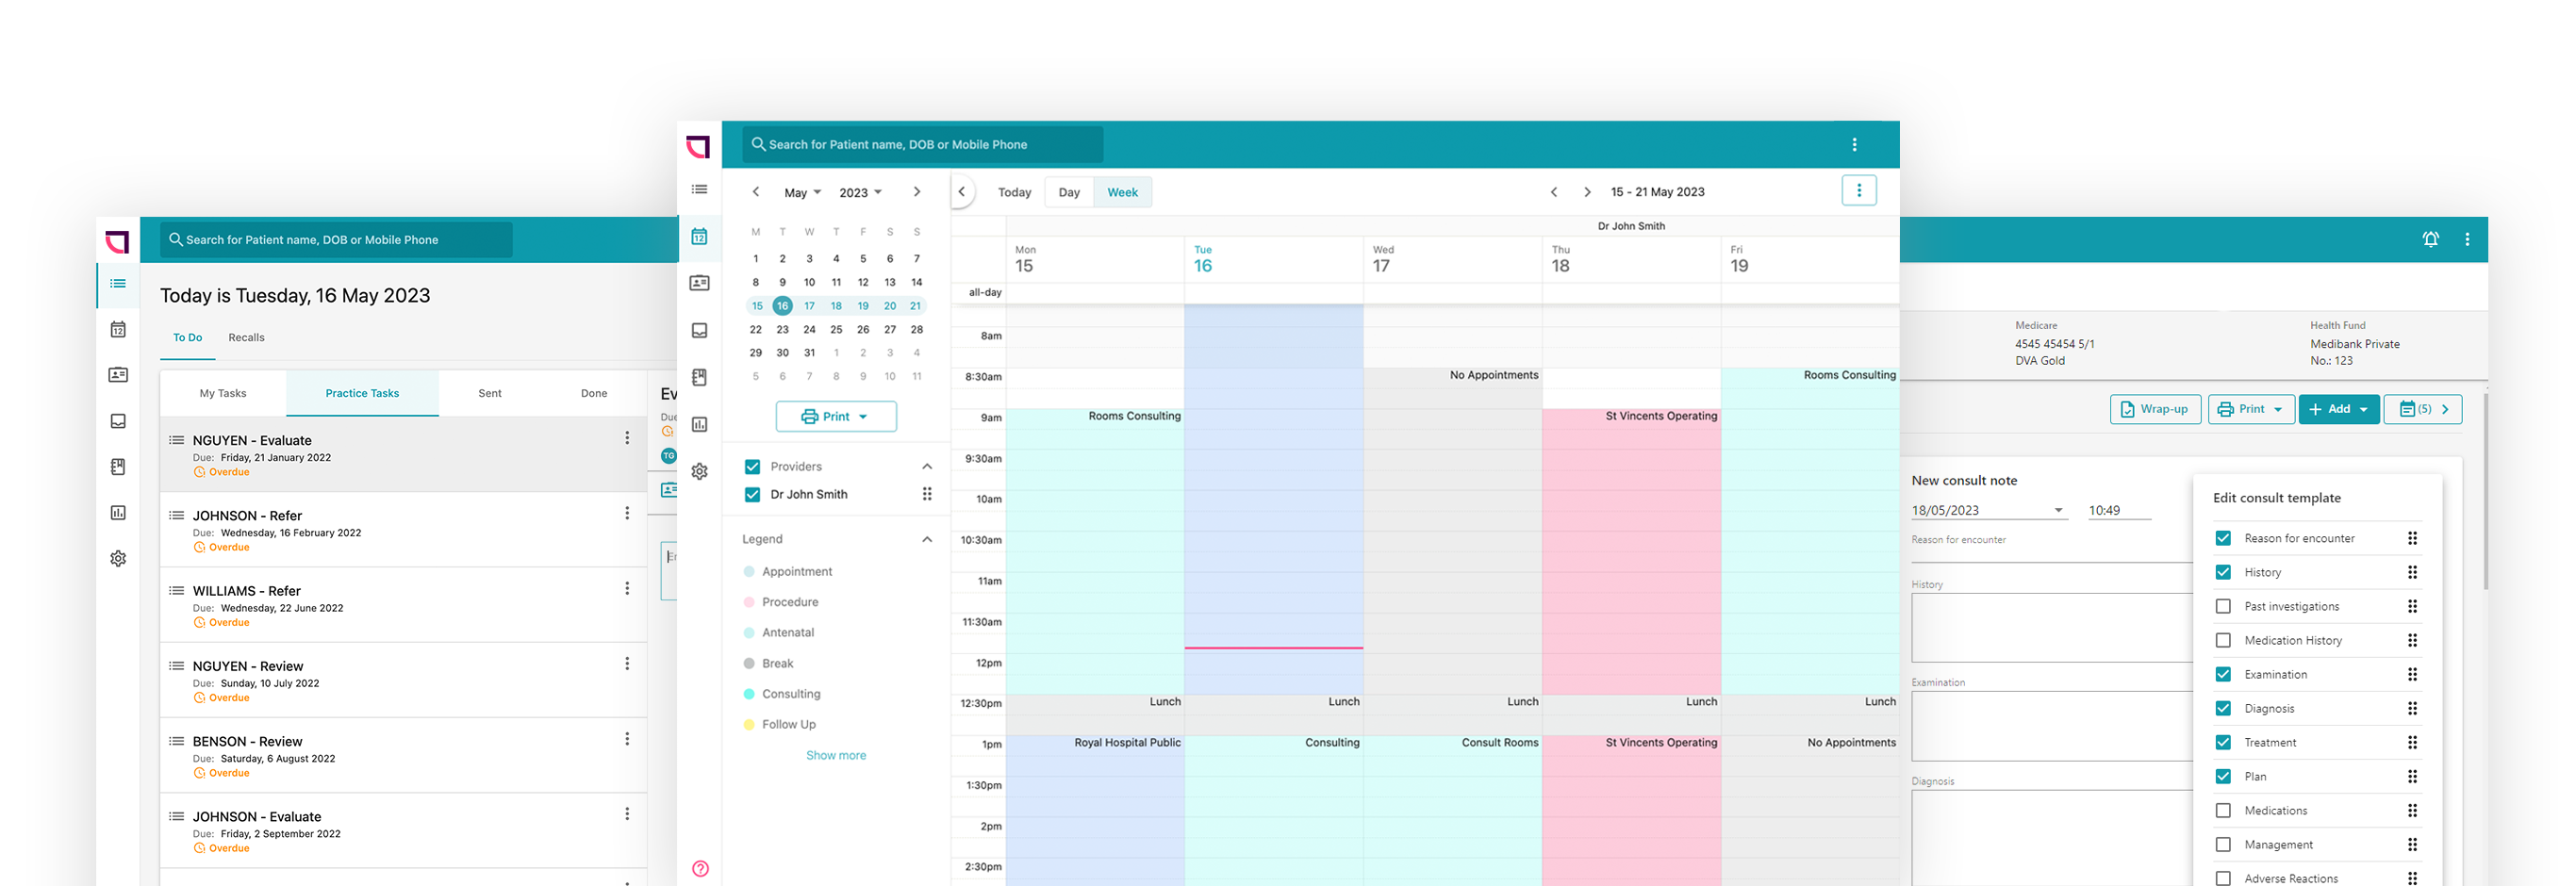 Gentu practice management software mockup showing appointments, patient data and clinical management